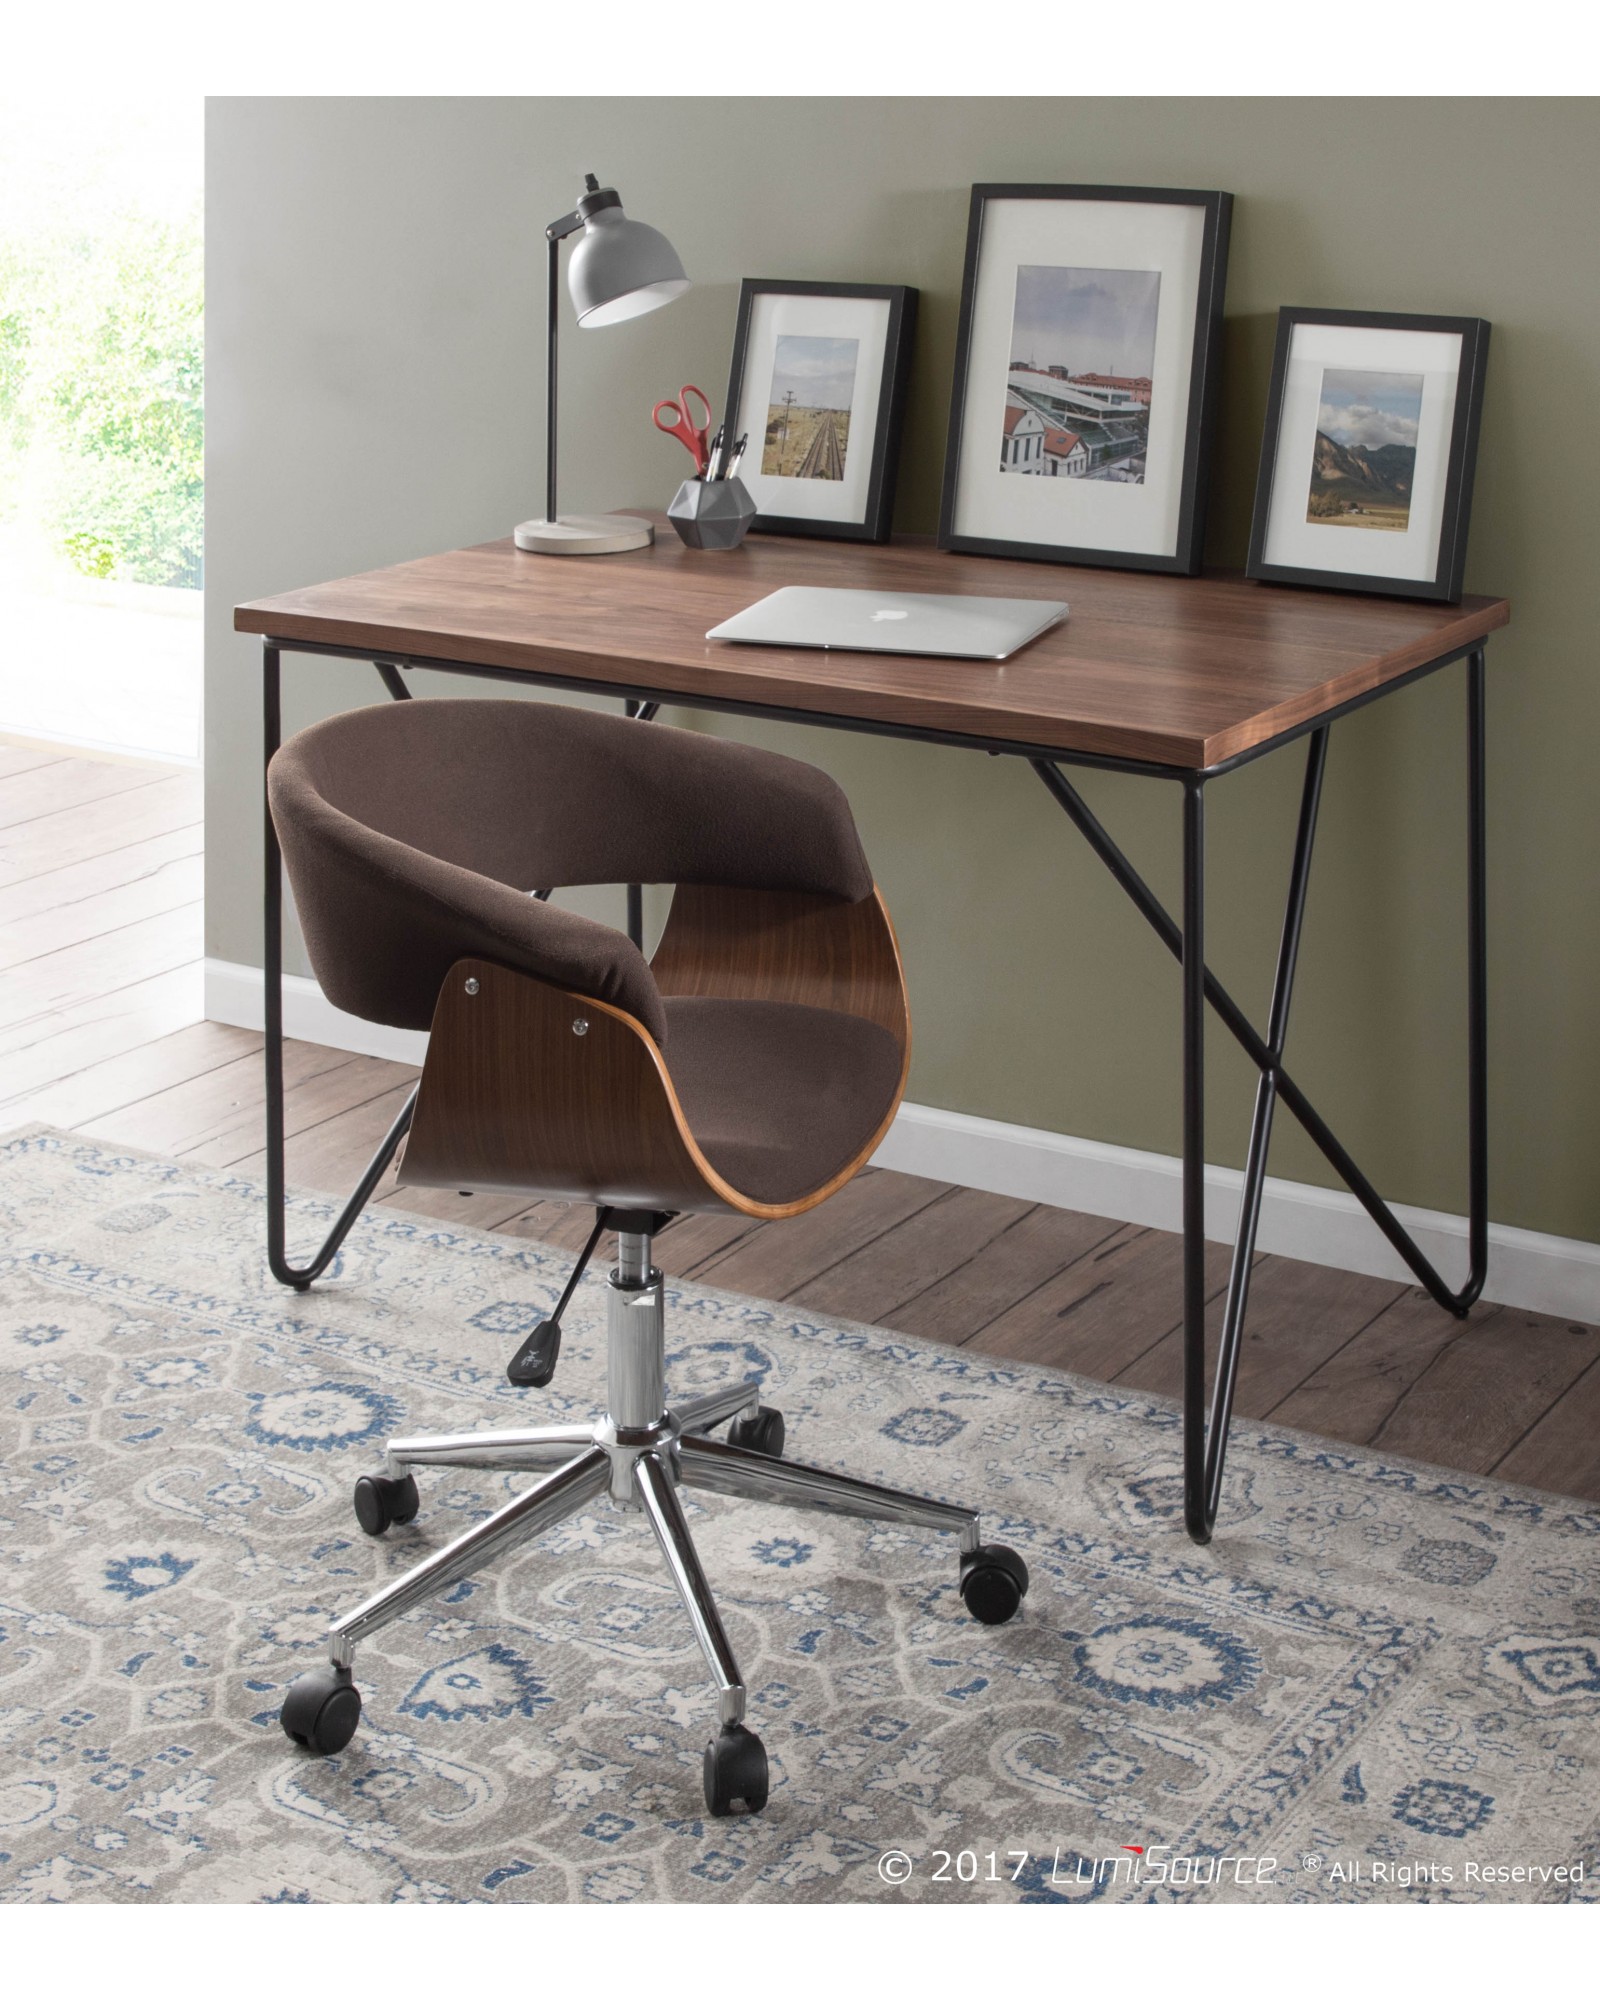 Vintage Mod Mid-Century Modern Office Chair in Walnut Wood and Espresso Fabric